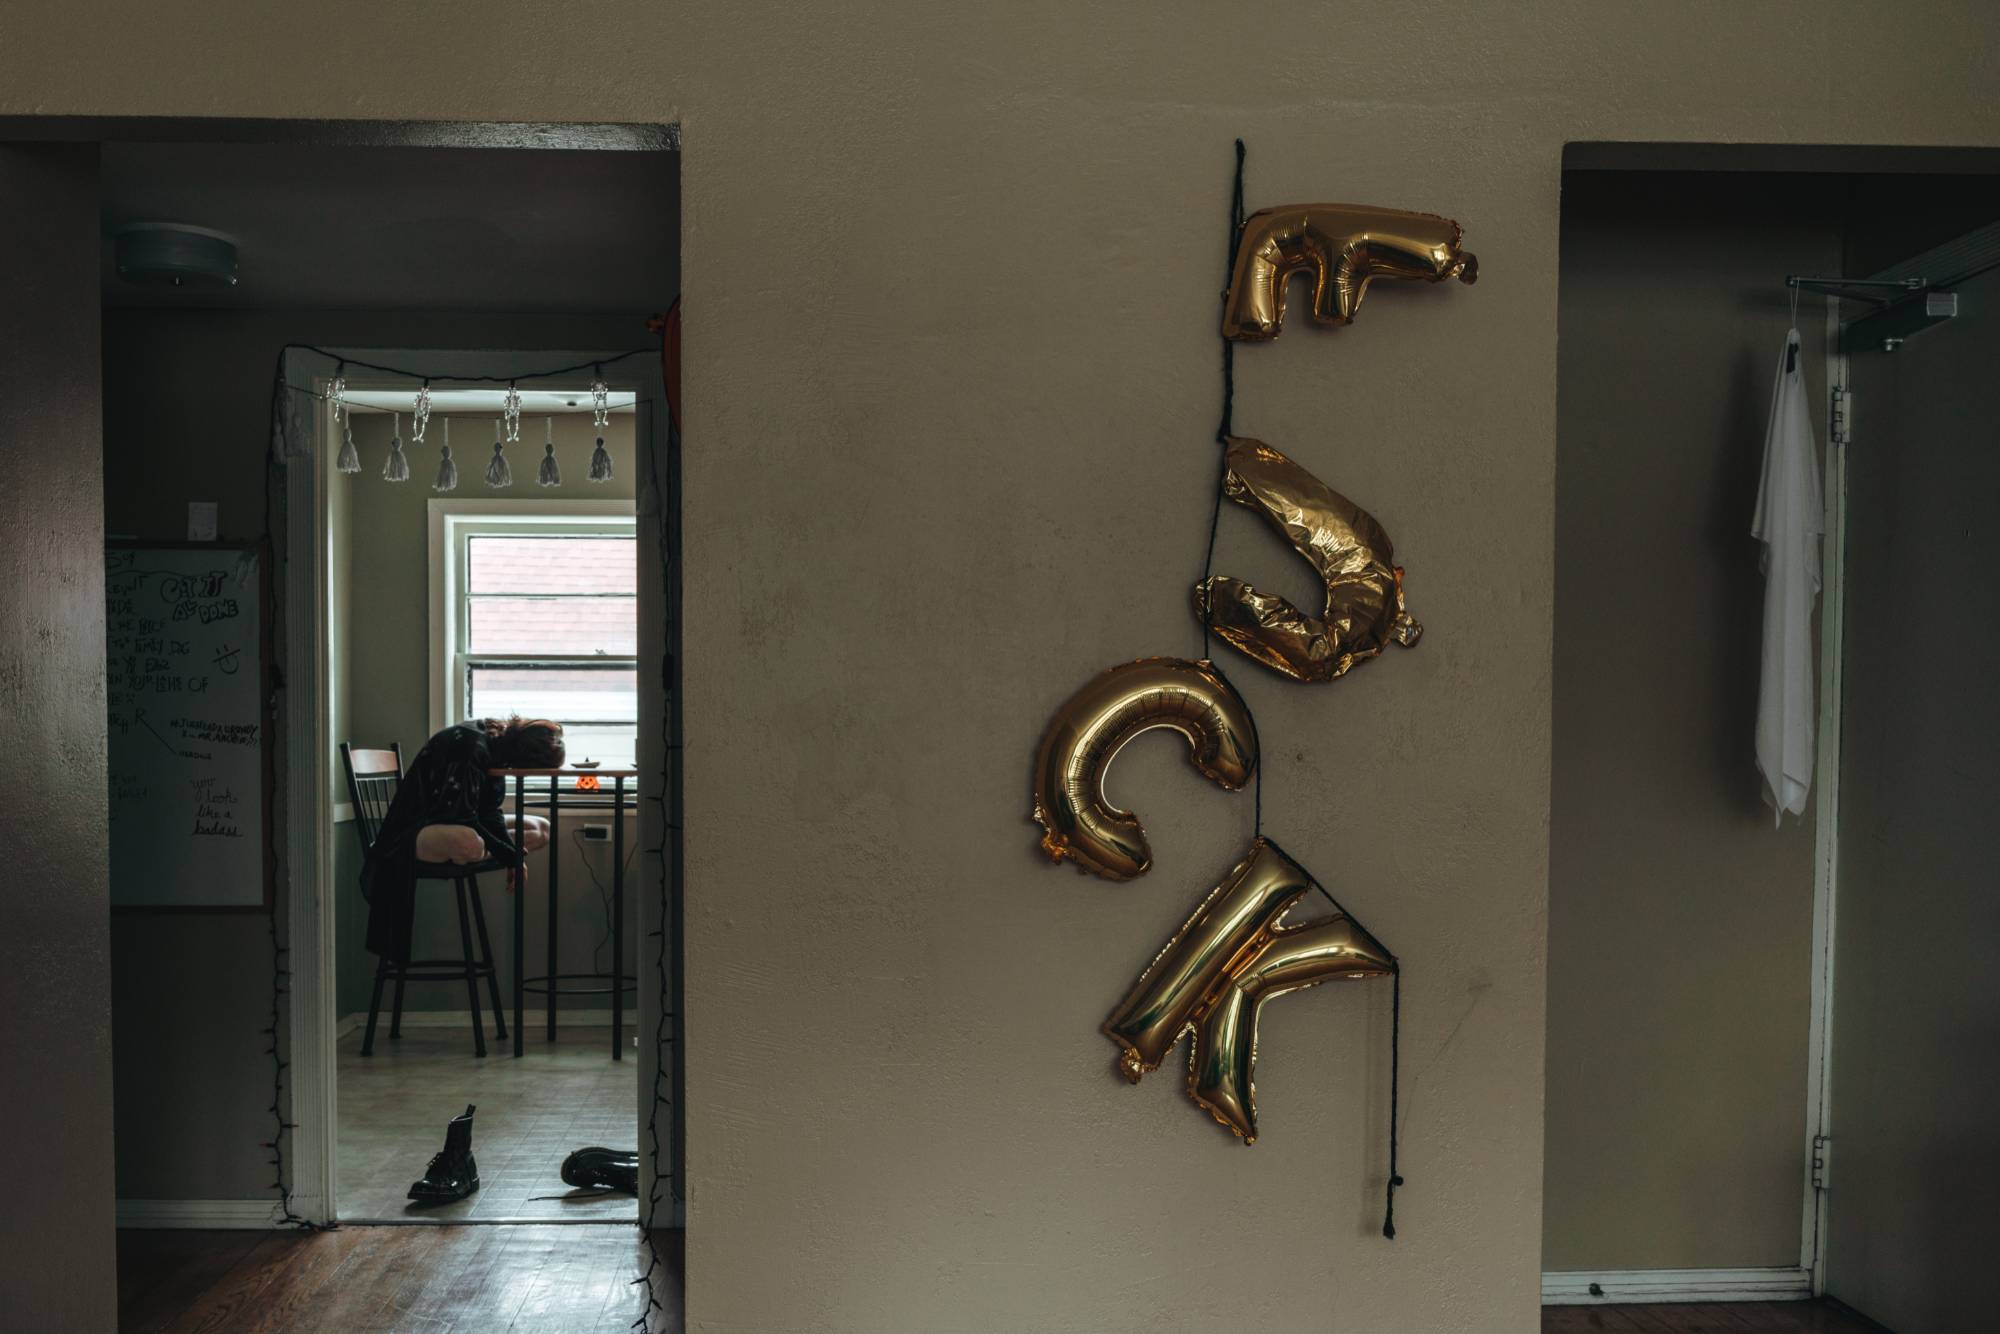 milar letter balloons attached to wall that spell "F U C K"